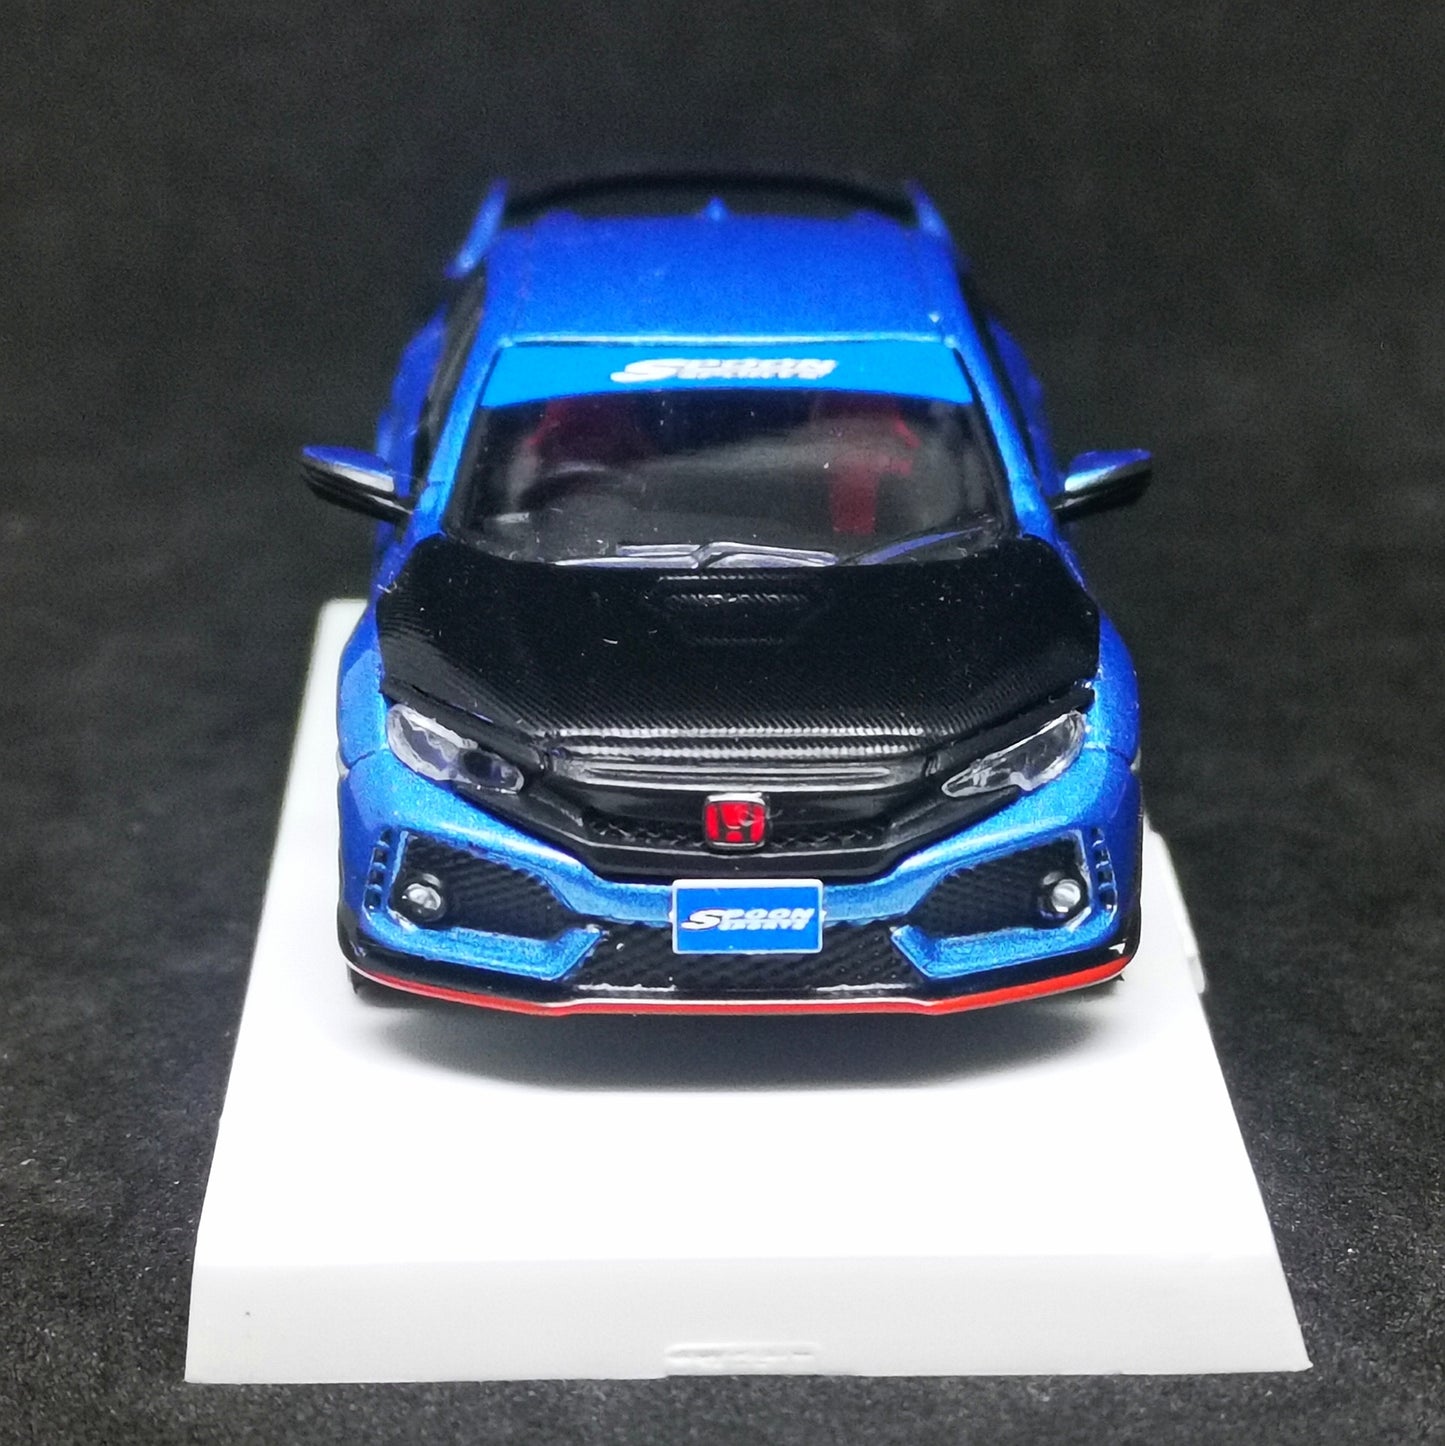 Tarmac Works 1:64 scale Hong Kong Exclusive Honda Civic FK8 TypeR With container